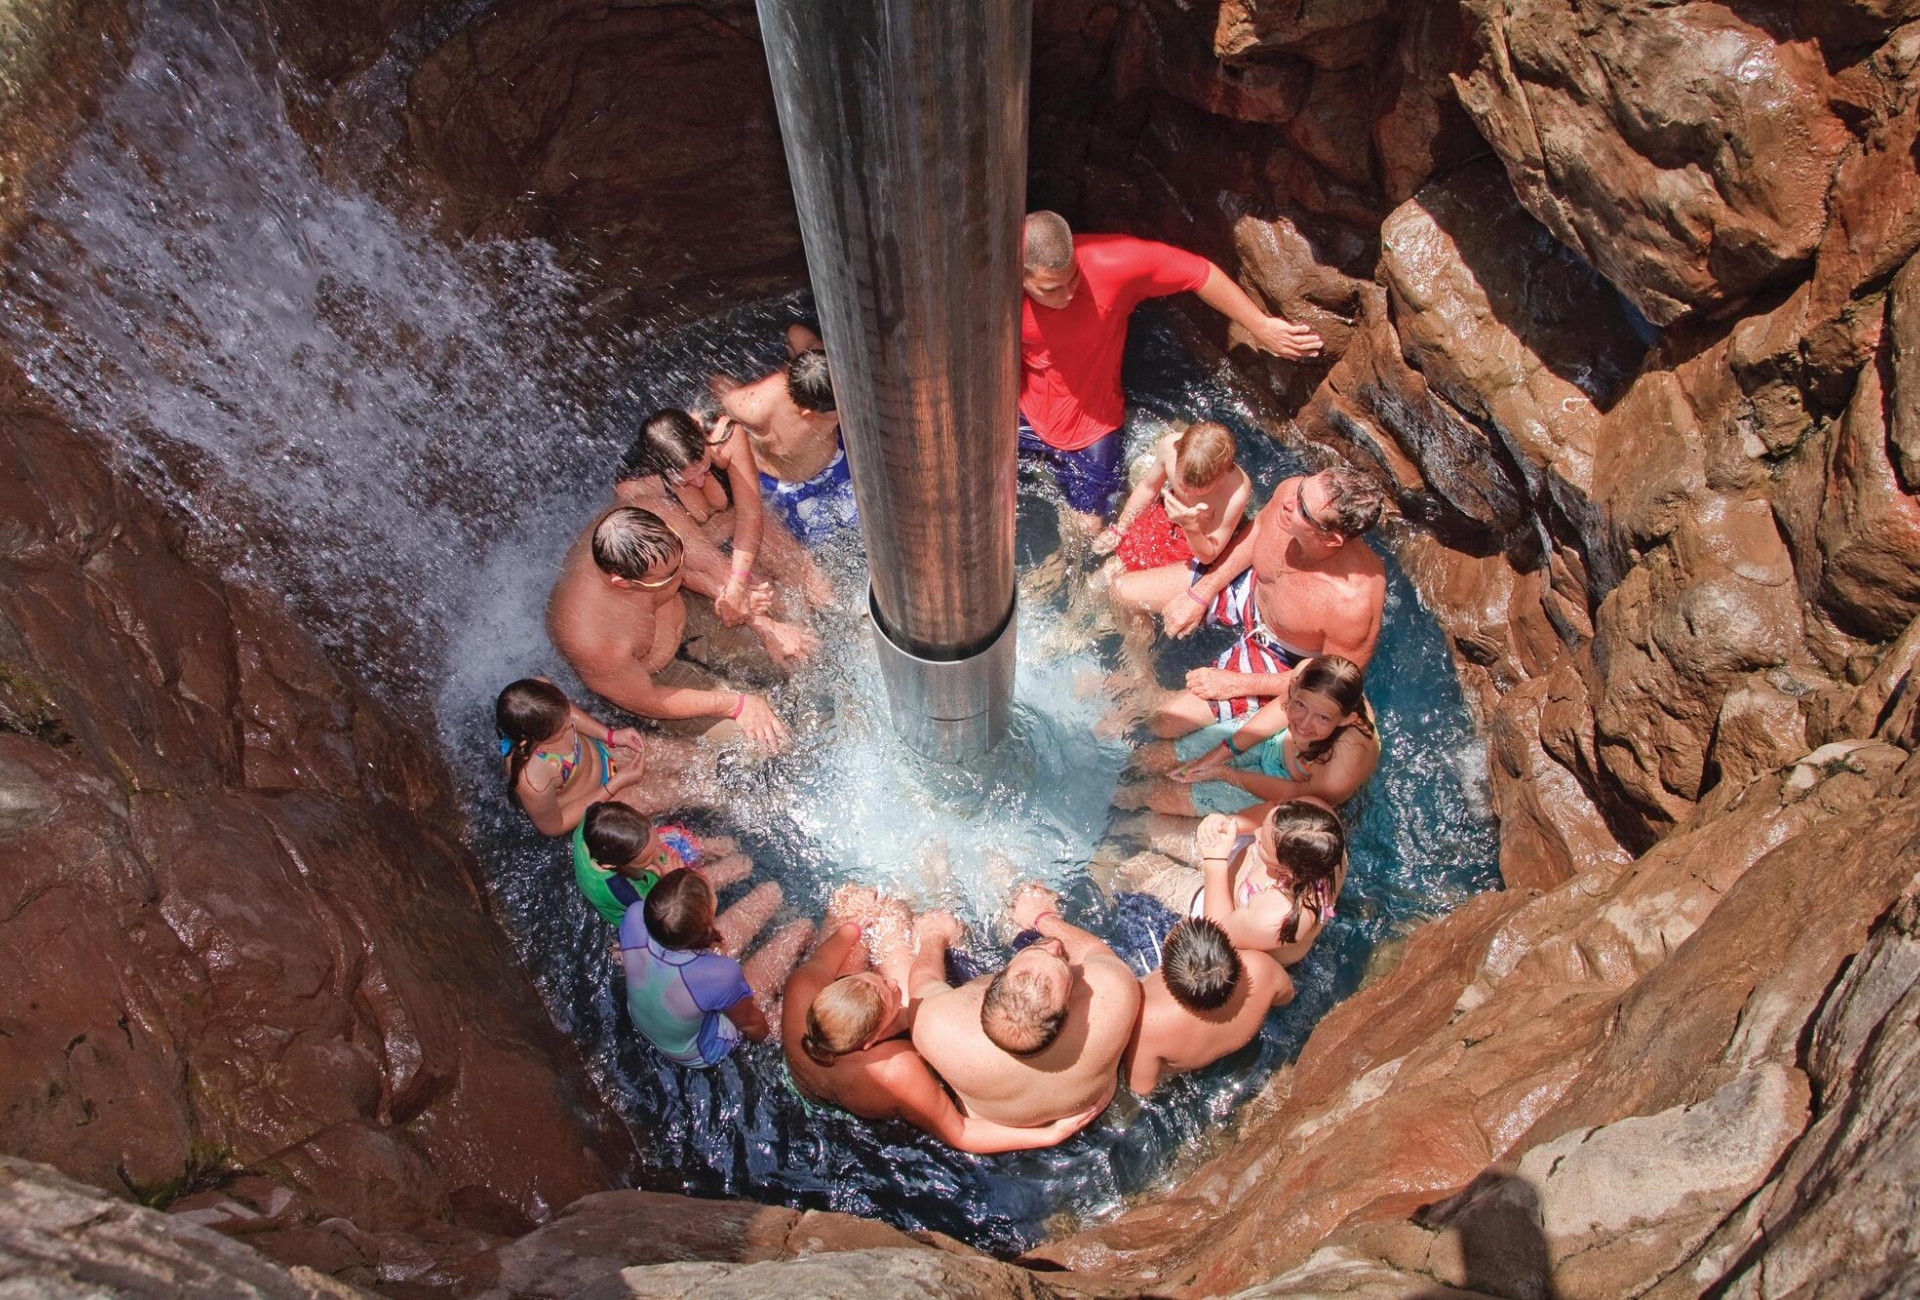 a group of people in a stone water elevator while water pours down onto them